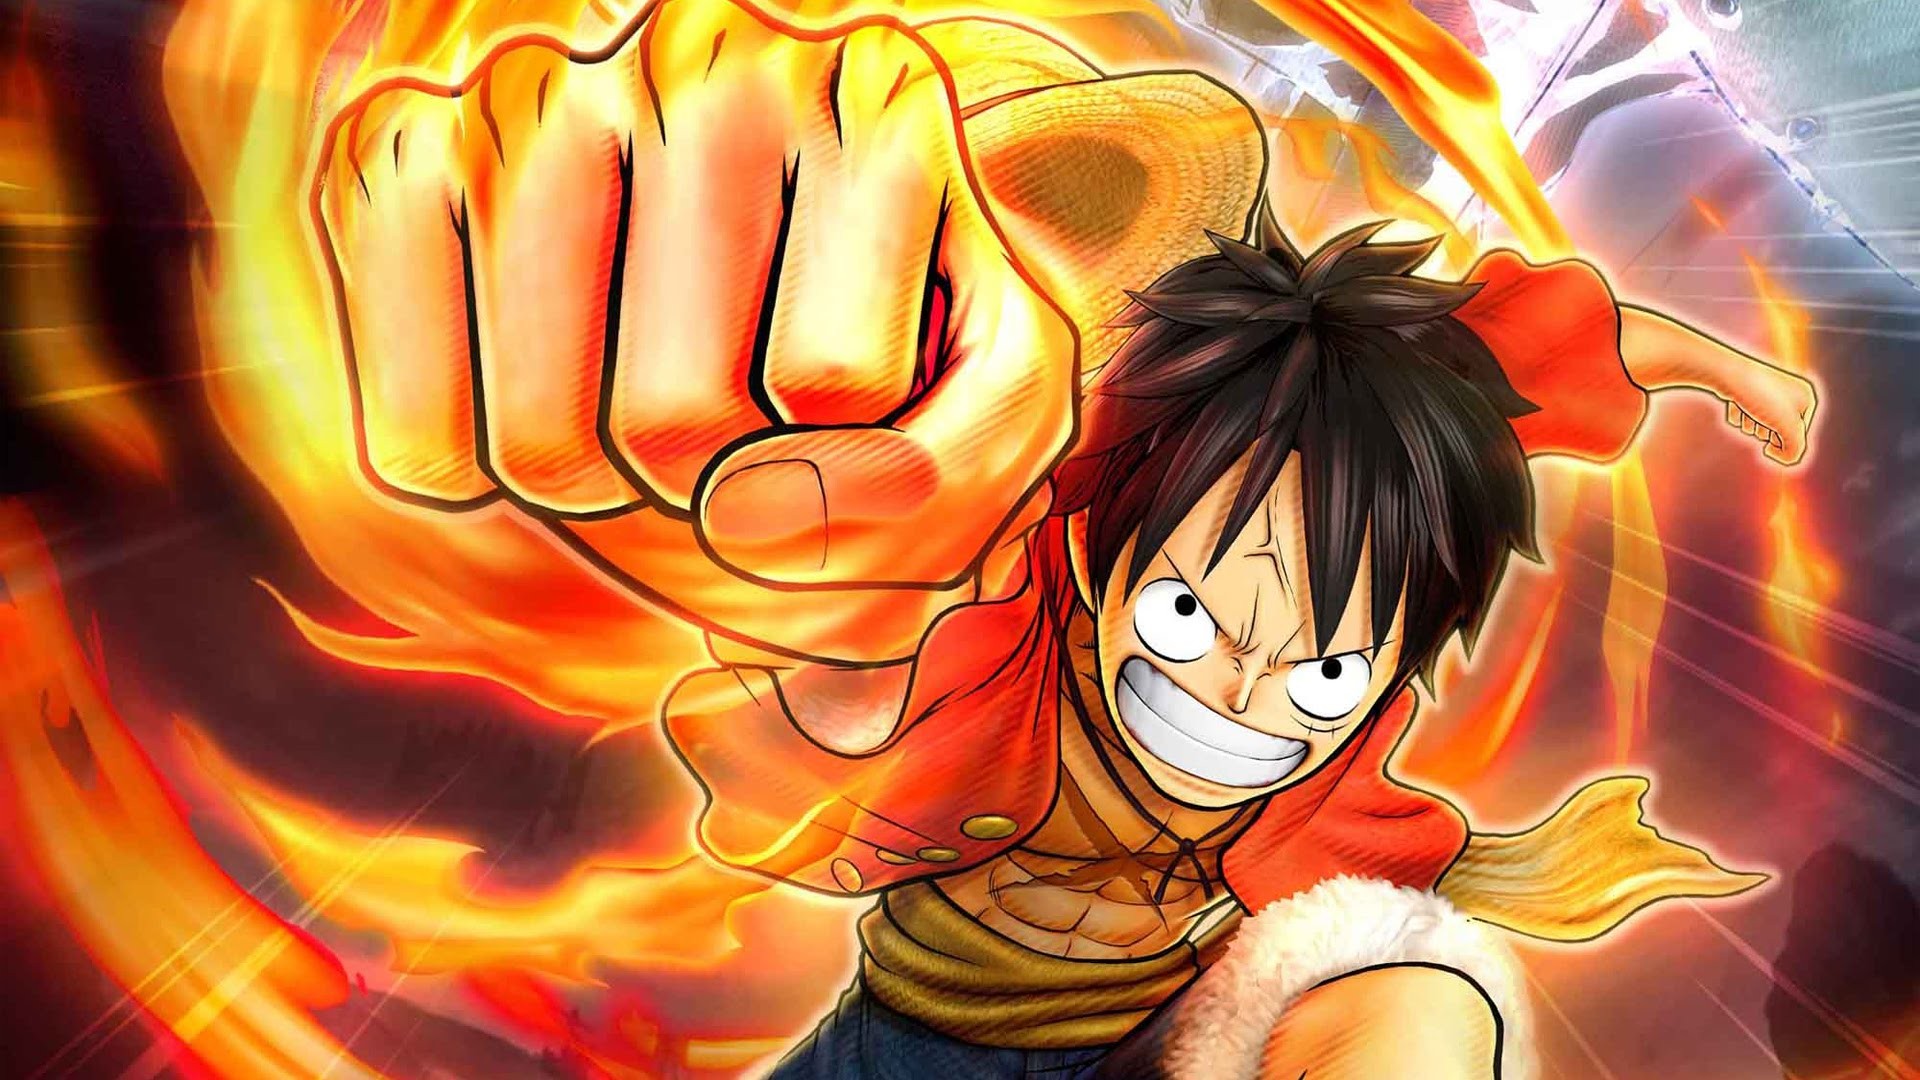 One Piece Ending: When will the Manga Series get over, and what will be the Final Reveal?